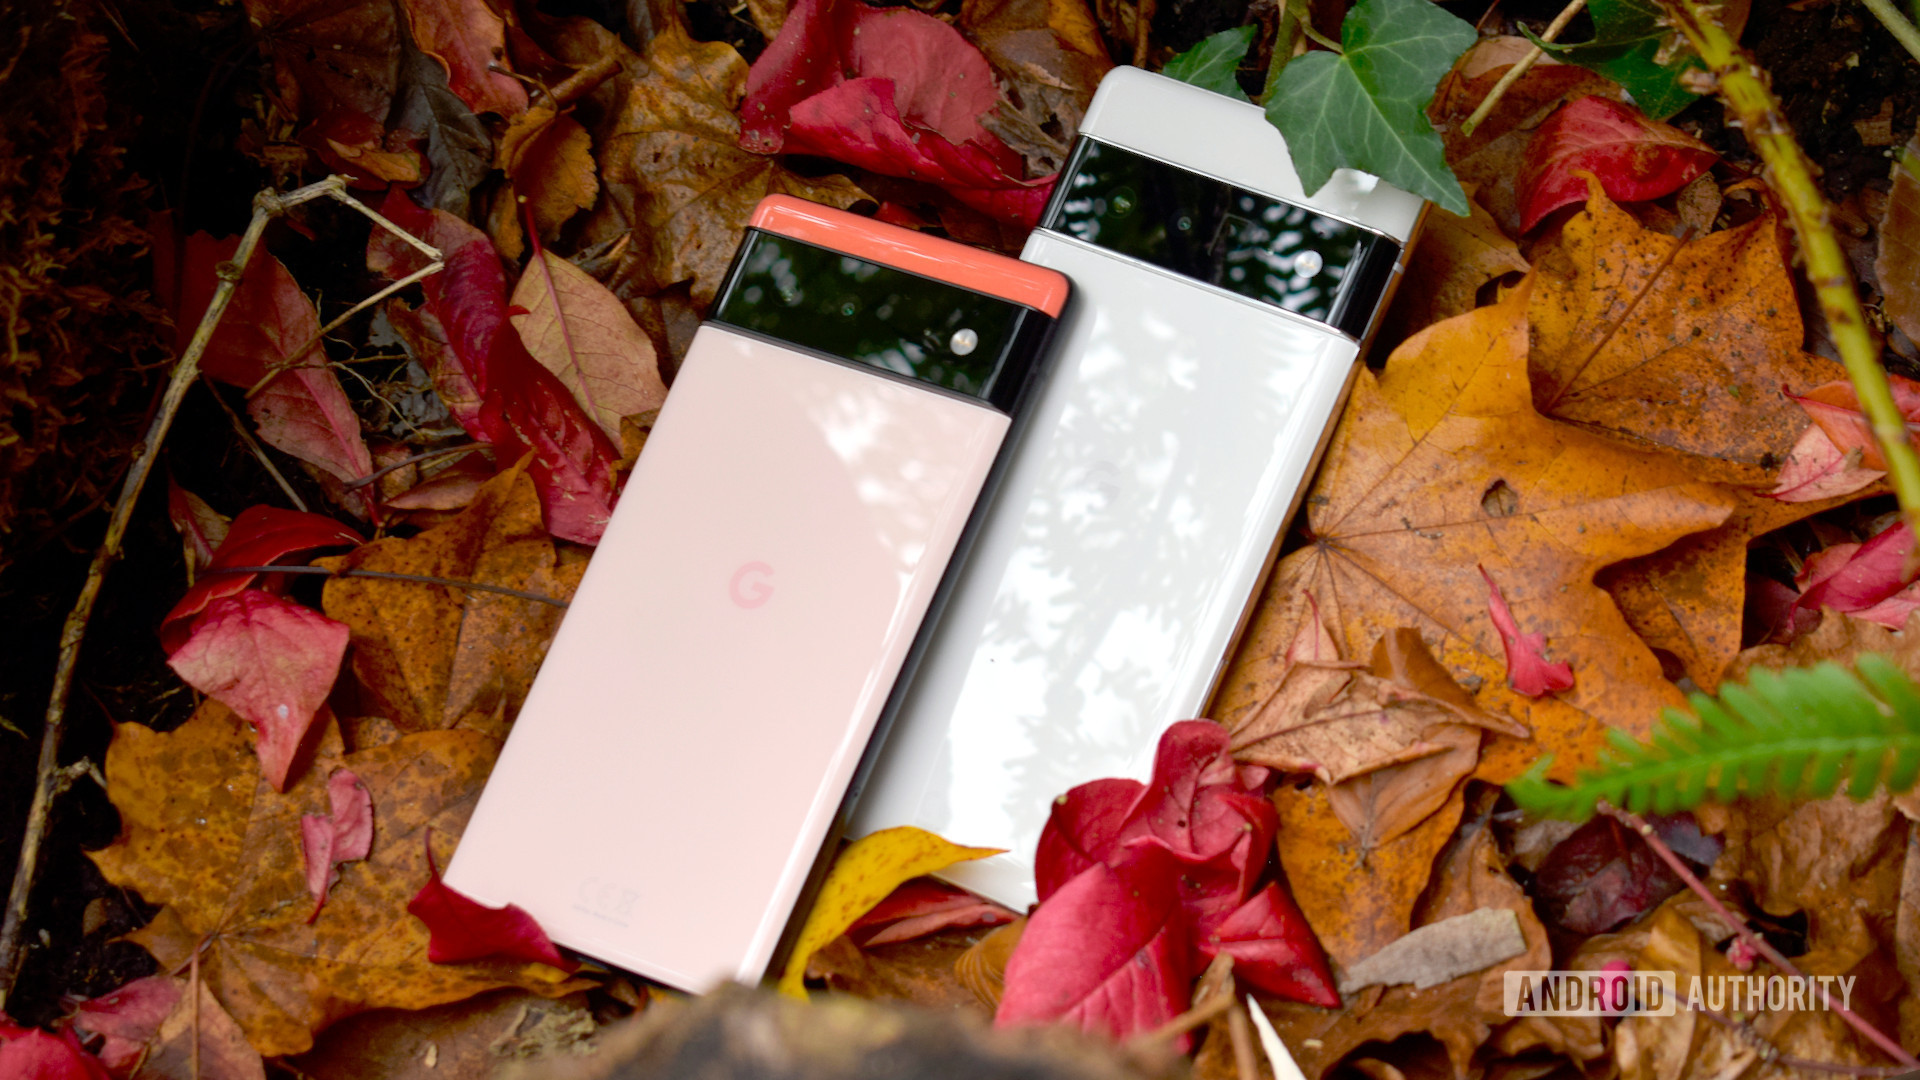 Google Pixel 6 and Pixel 6 Pro lying on autumn leaves - Phones with Night Mode